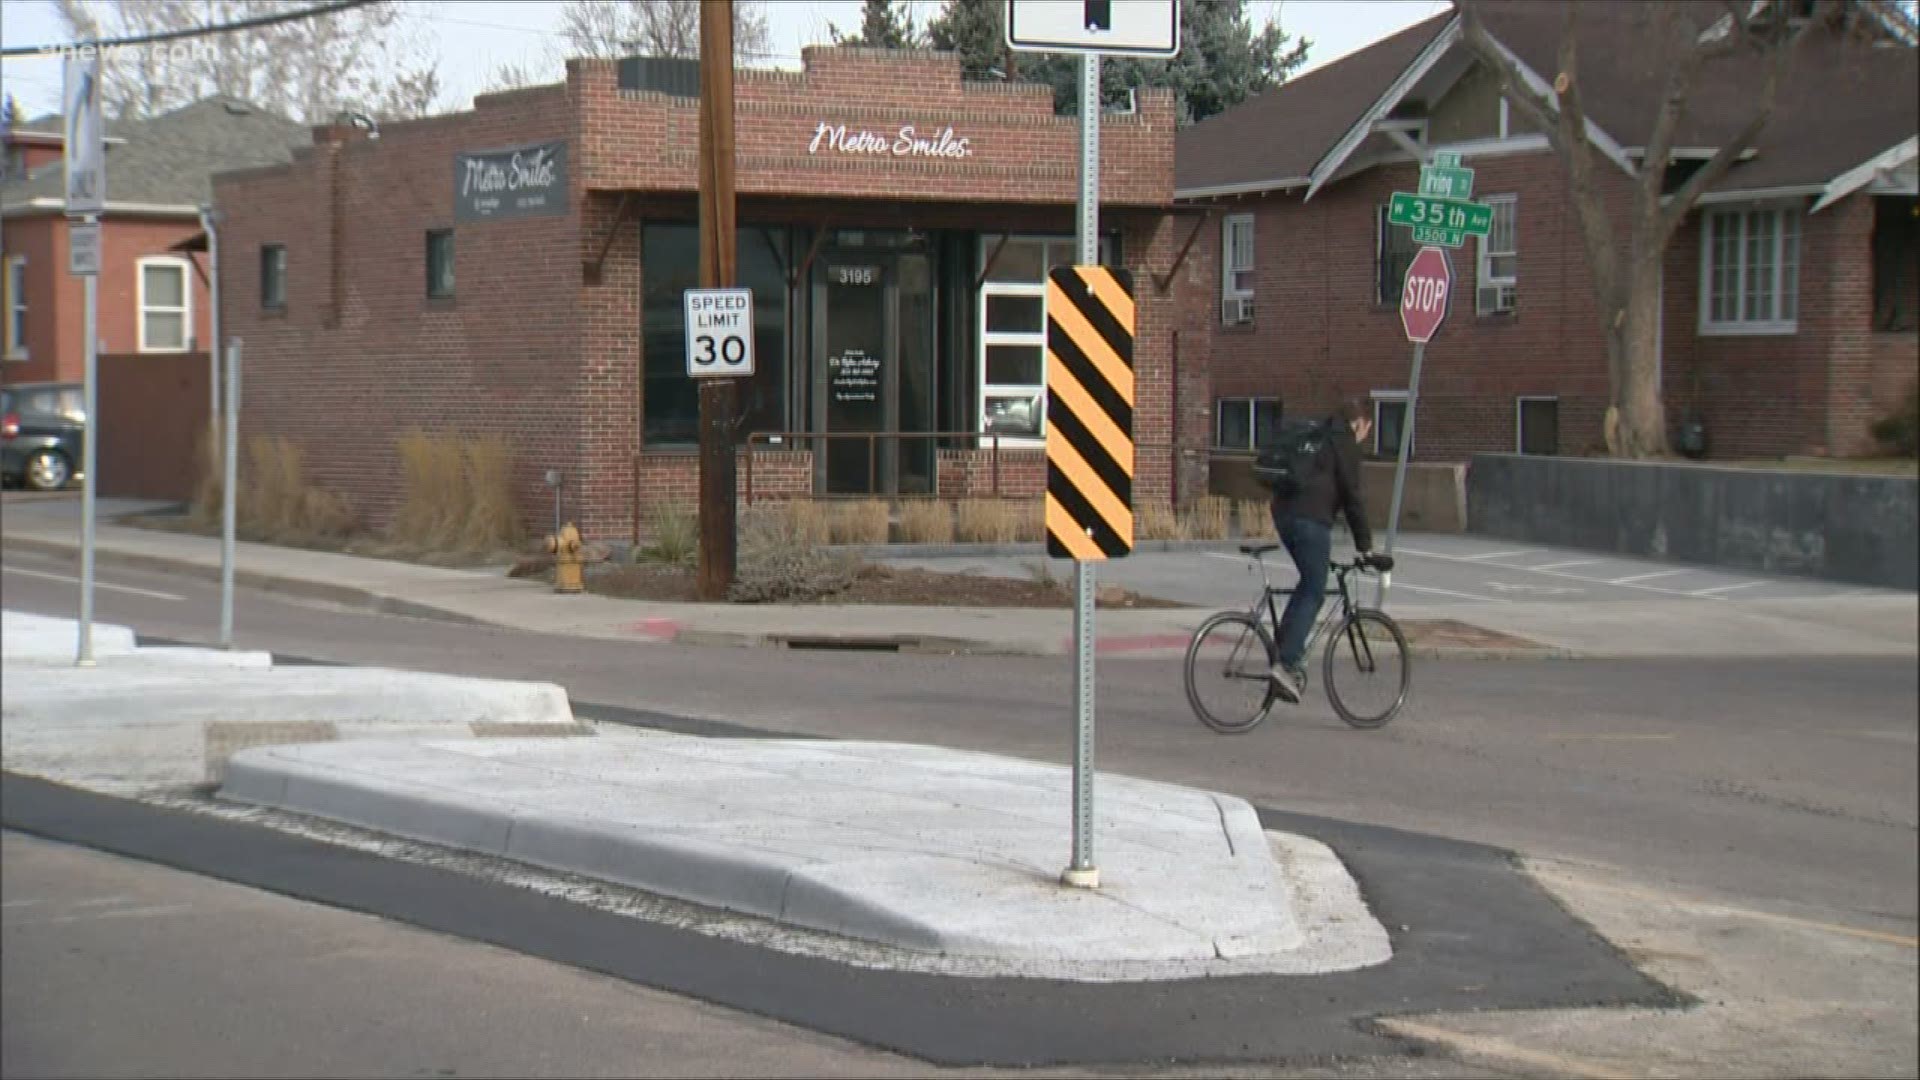 The move is an effort to make biking in Denver a safer and more comfortable commuting option.